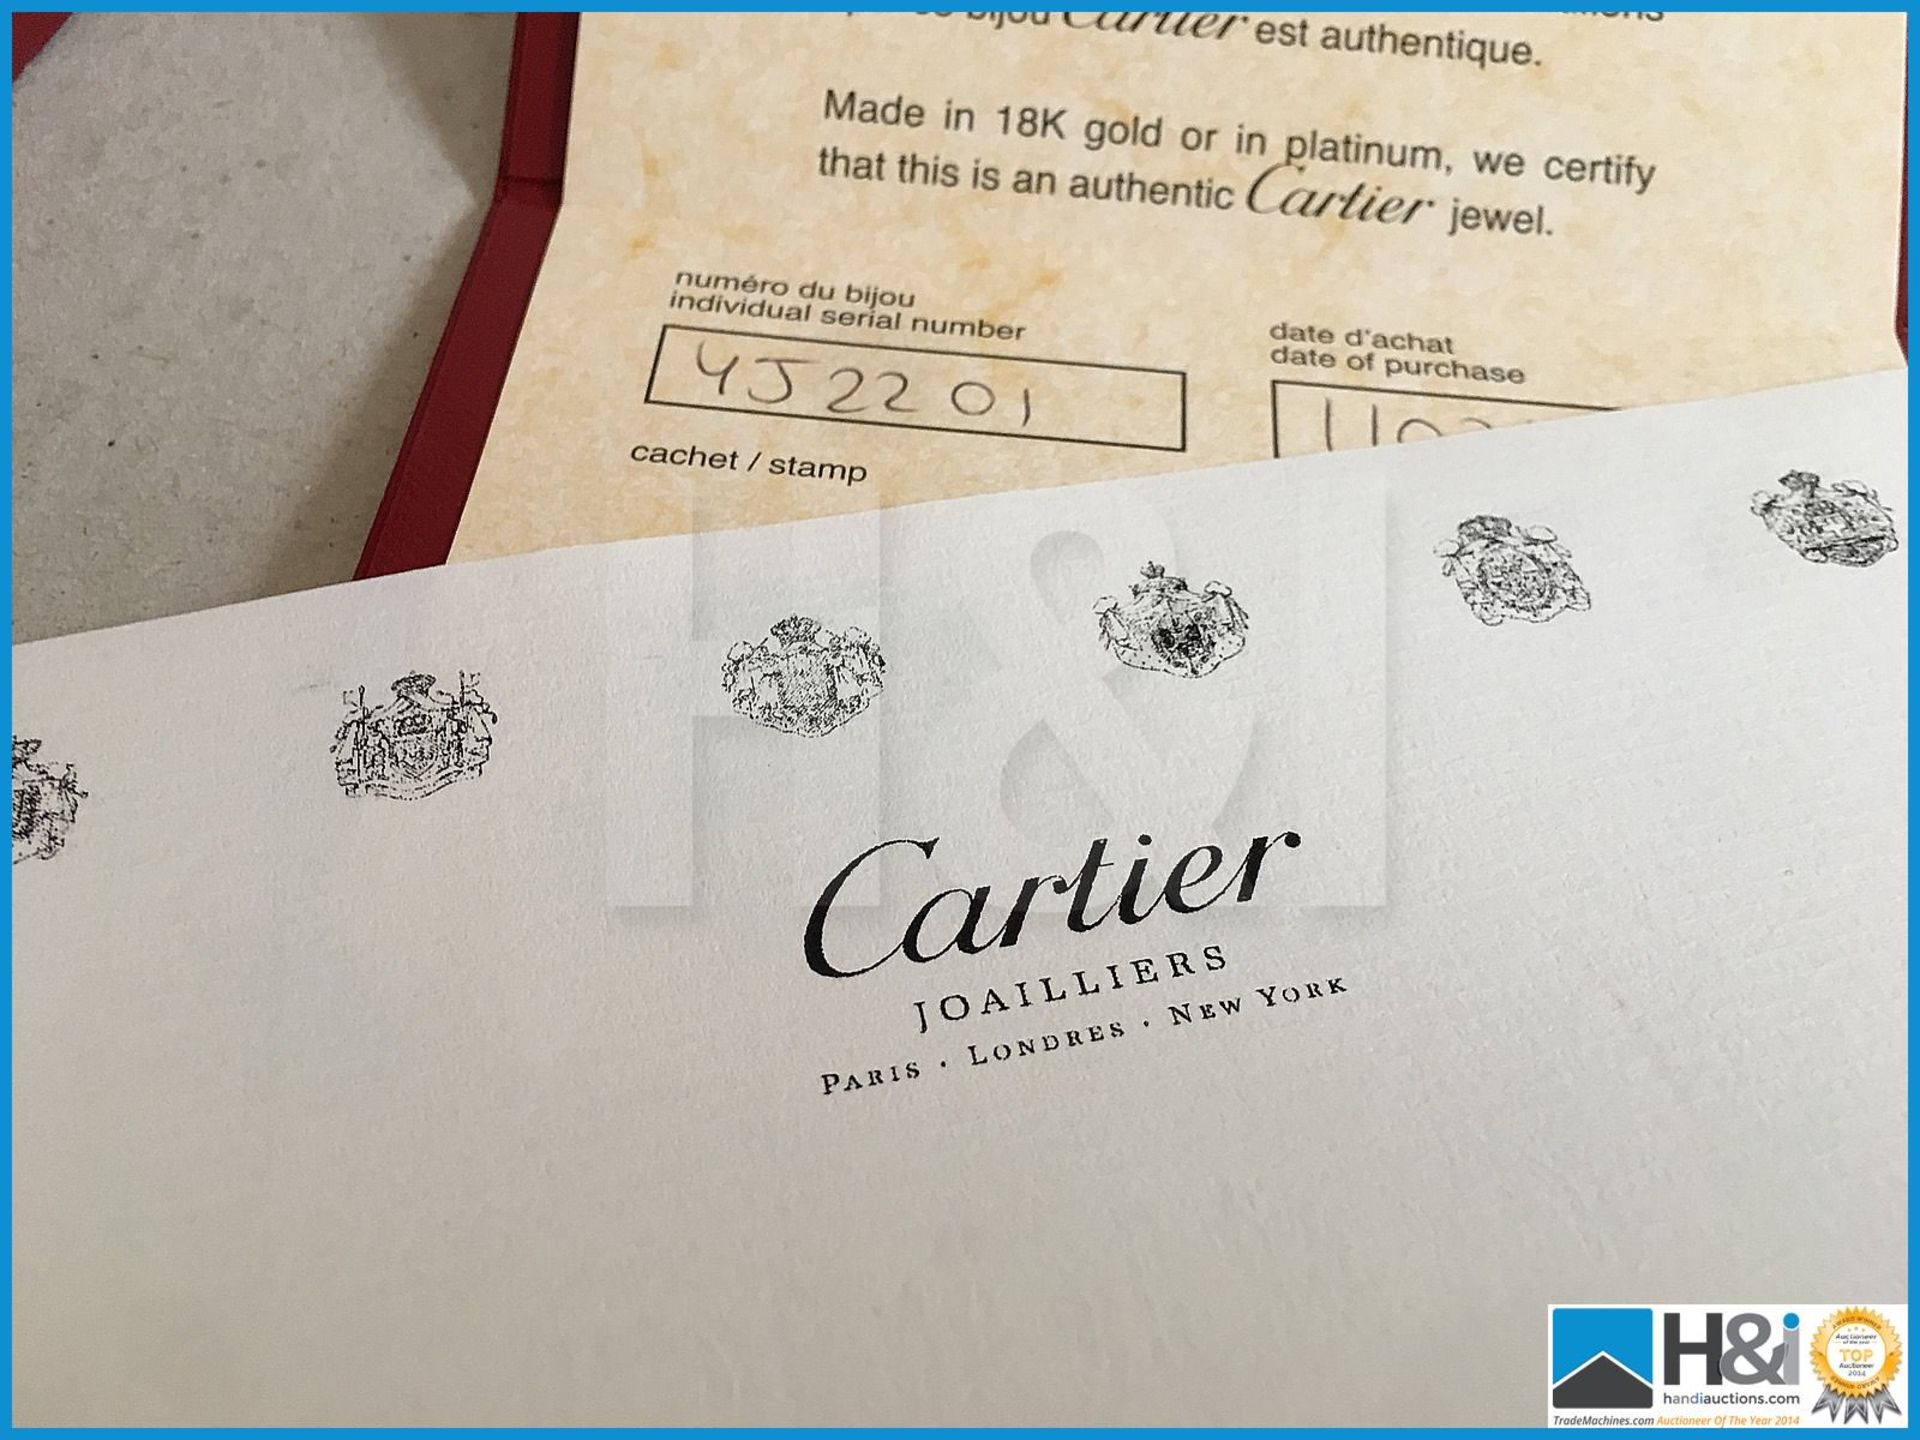 Pair of unworn genuine Cartier Diamond & Platinum earrings presented with a host of certificates, pa - Image 17 of 17